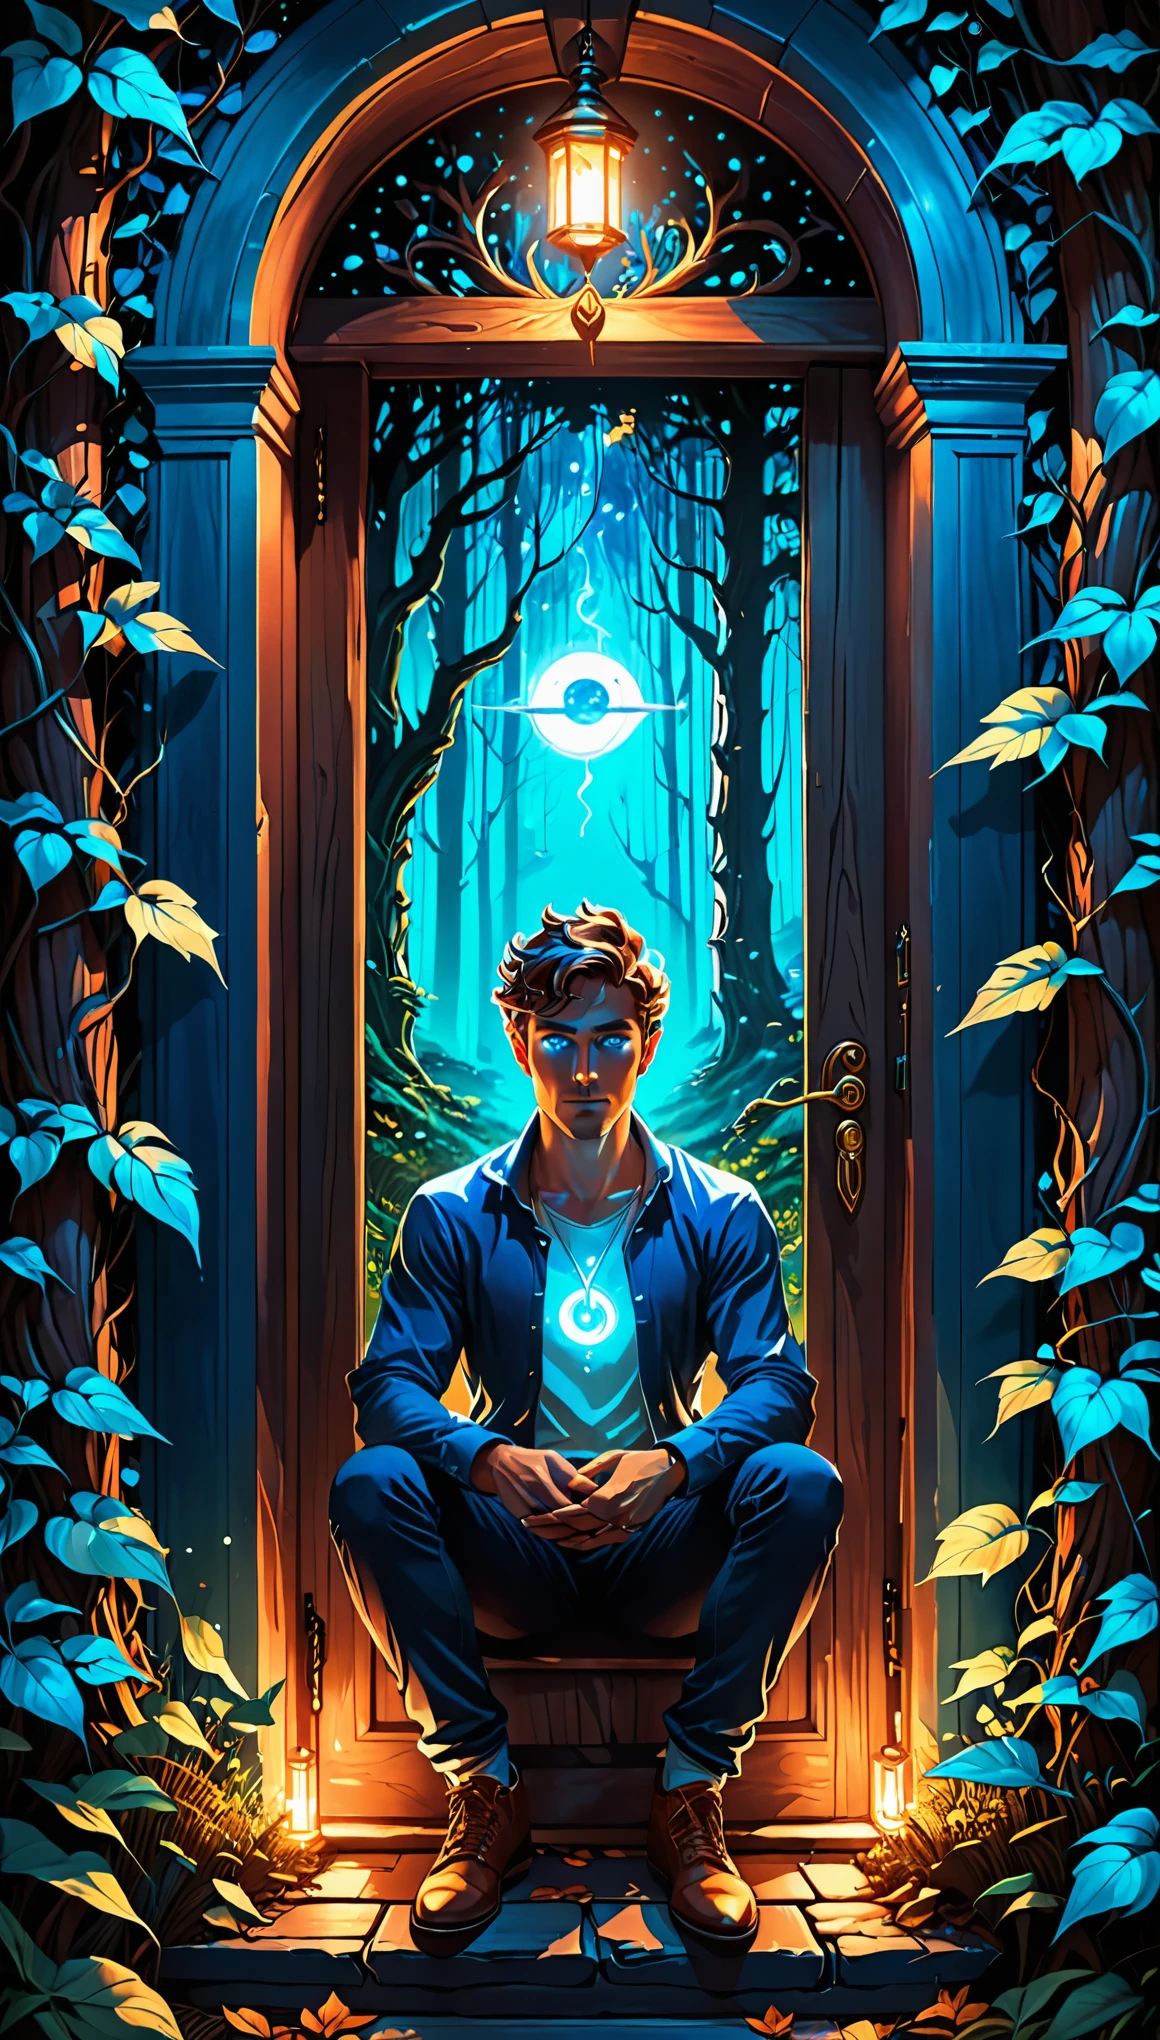 a man with glowing blue eyes sits in the doorway, Cyril Rolando и Горо Фудзита, inspired Cyril Rolando, In the style of Cyril Rolando, in the style of Dan Mumford, Cyril Rolando, digital 2D fantasy art, Detailed digital art 4k, Epic fantasy in digital art style, 4K fantasy art, Forest Soul.